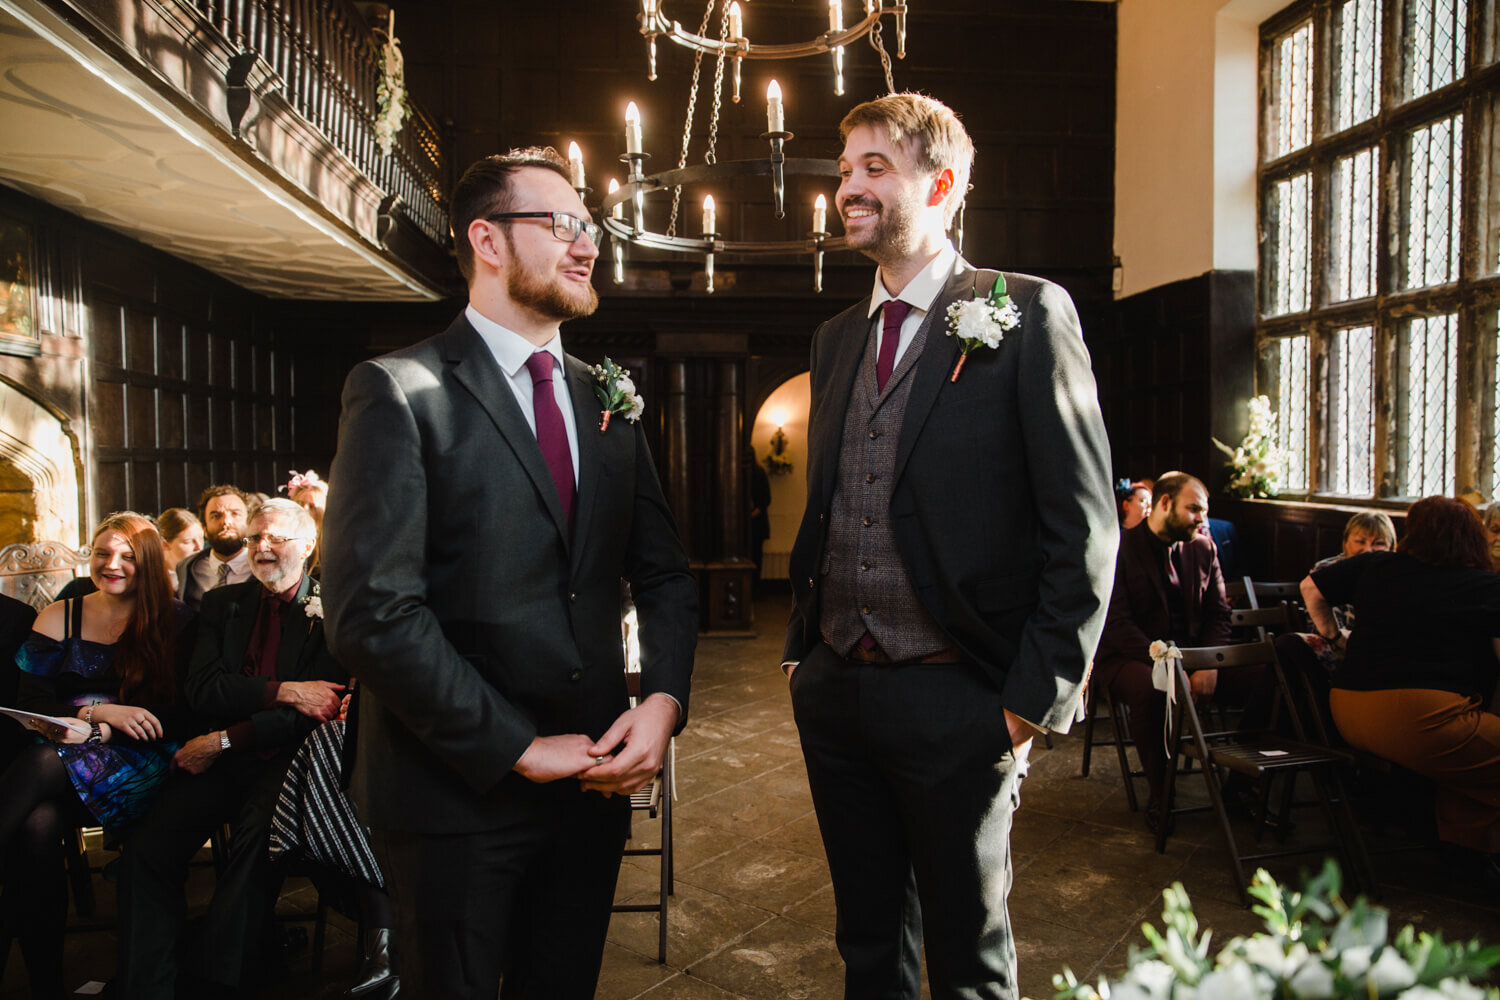 groom and best man at top of aisle before service commences